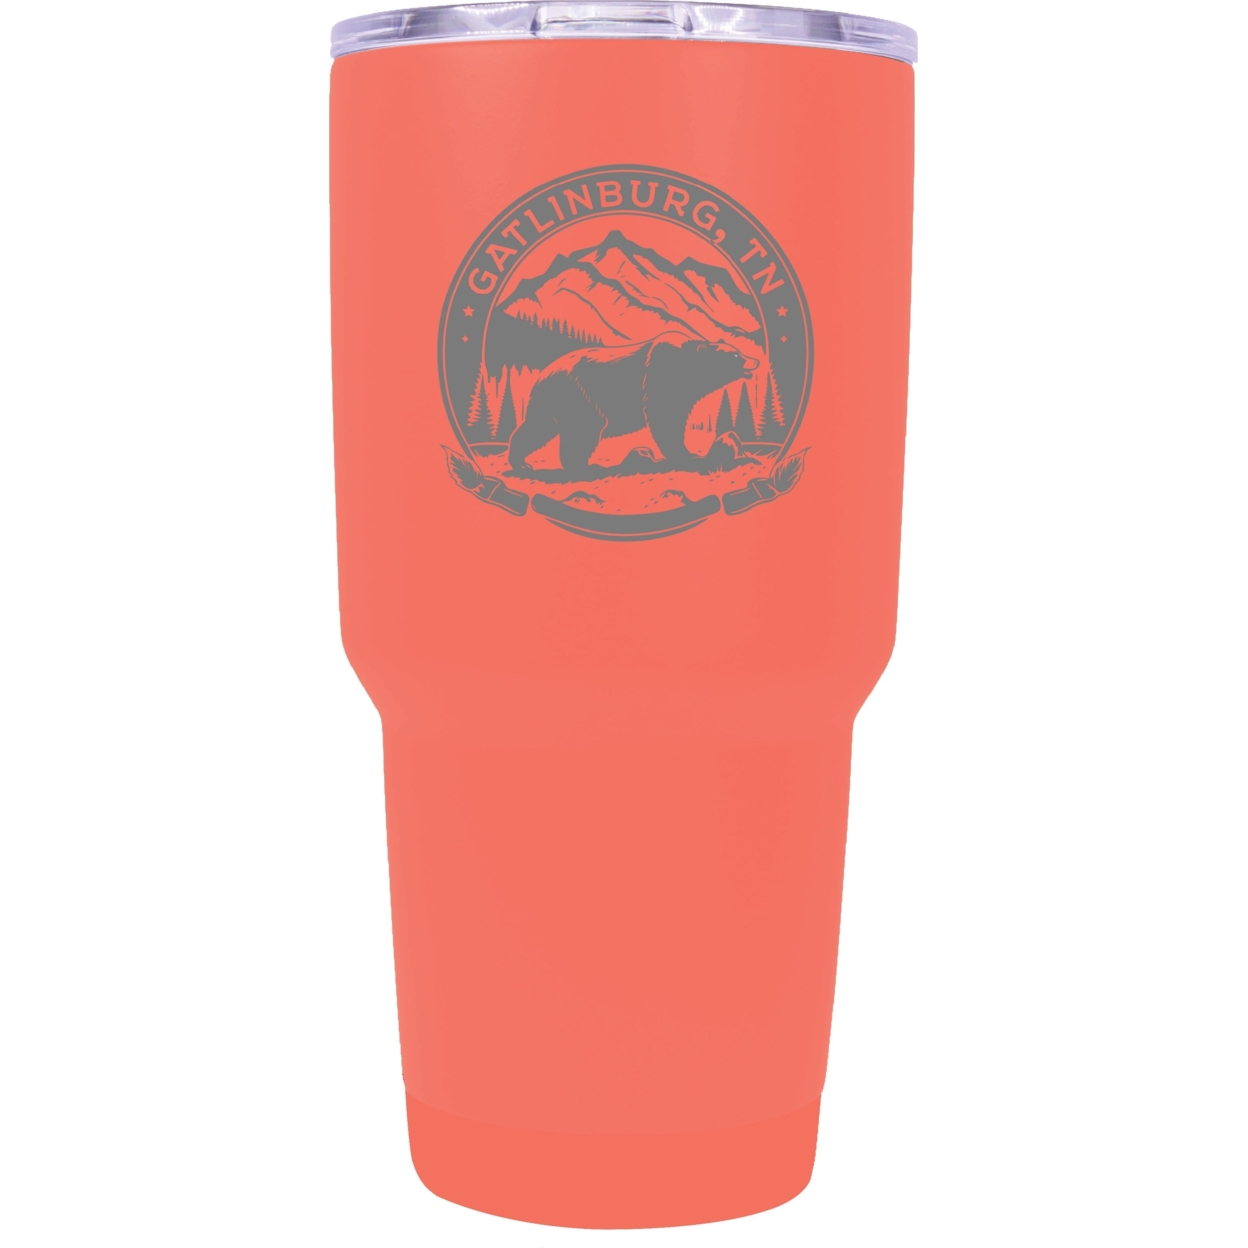 Gatlinburg Tennessee Laser Etched Souvenir 24 Oz Insulated Stainless Steel Tumbler - Rose Gold